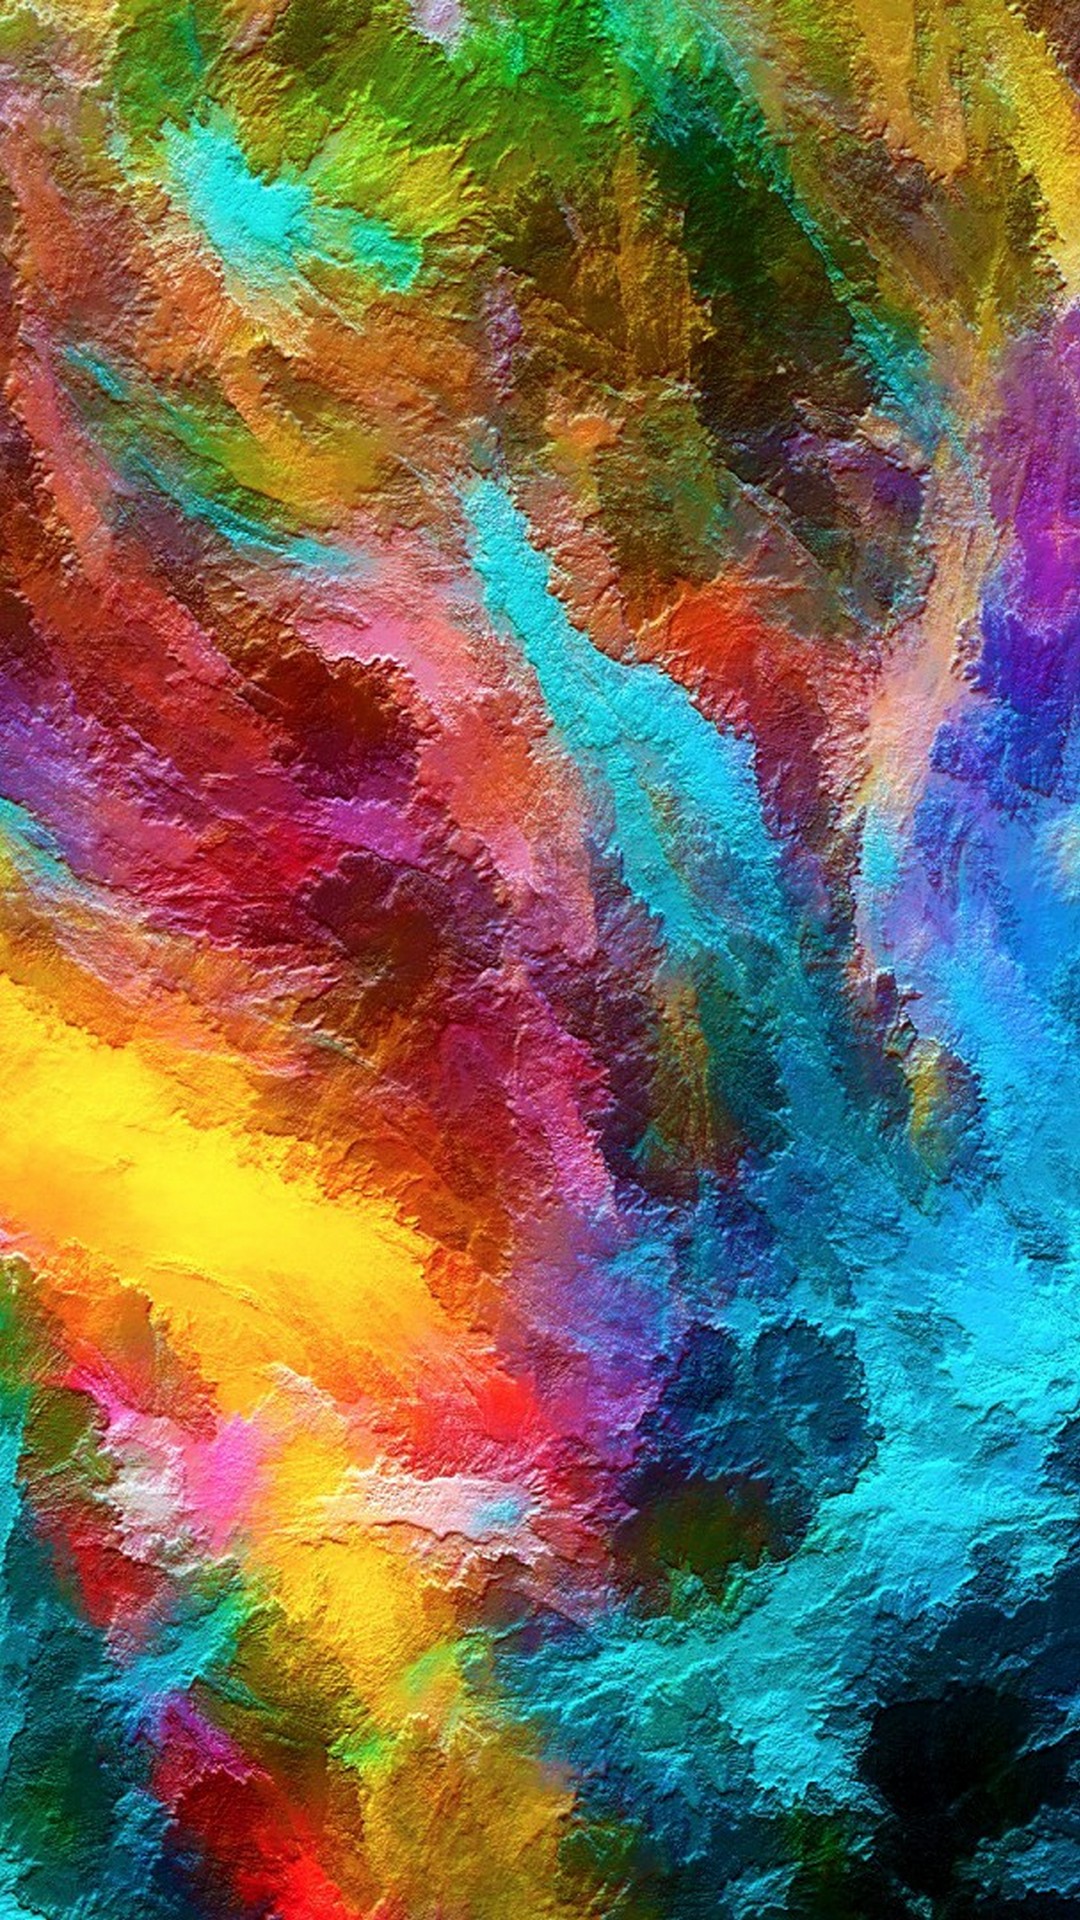 Dark Colorful iPhone X Wallpaper HD with high-resolution 1080x1920 pixel. Download all Mobile Wallpapers and Use them as wallpapers for your iPhone, Tablet, iPad, Android and other mobile devices